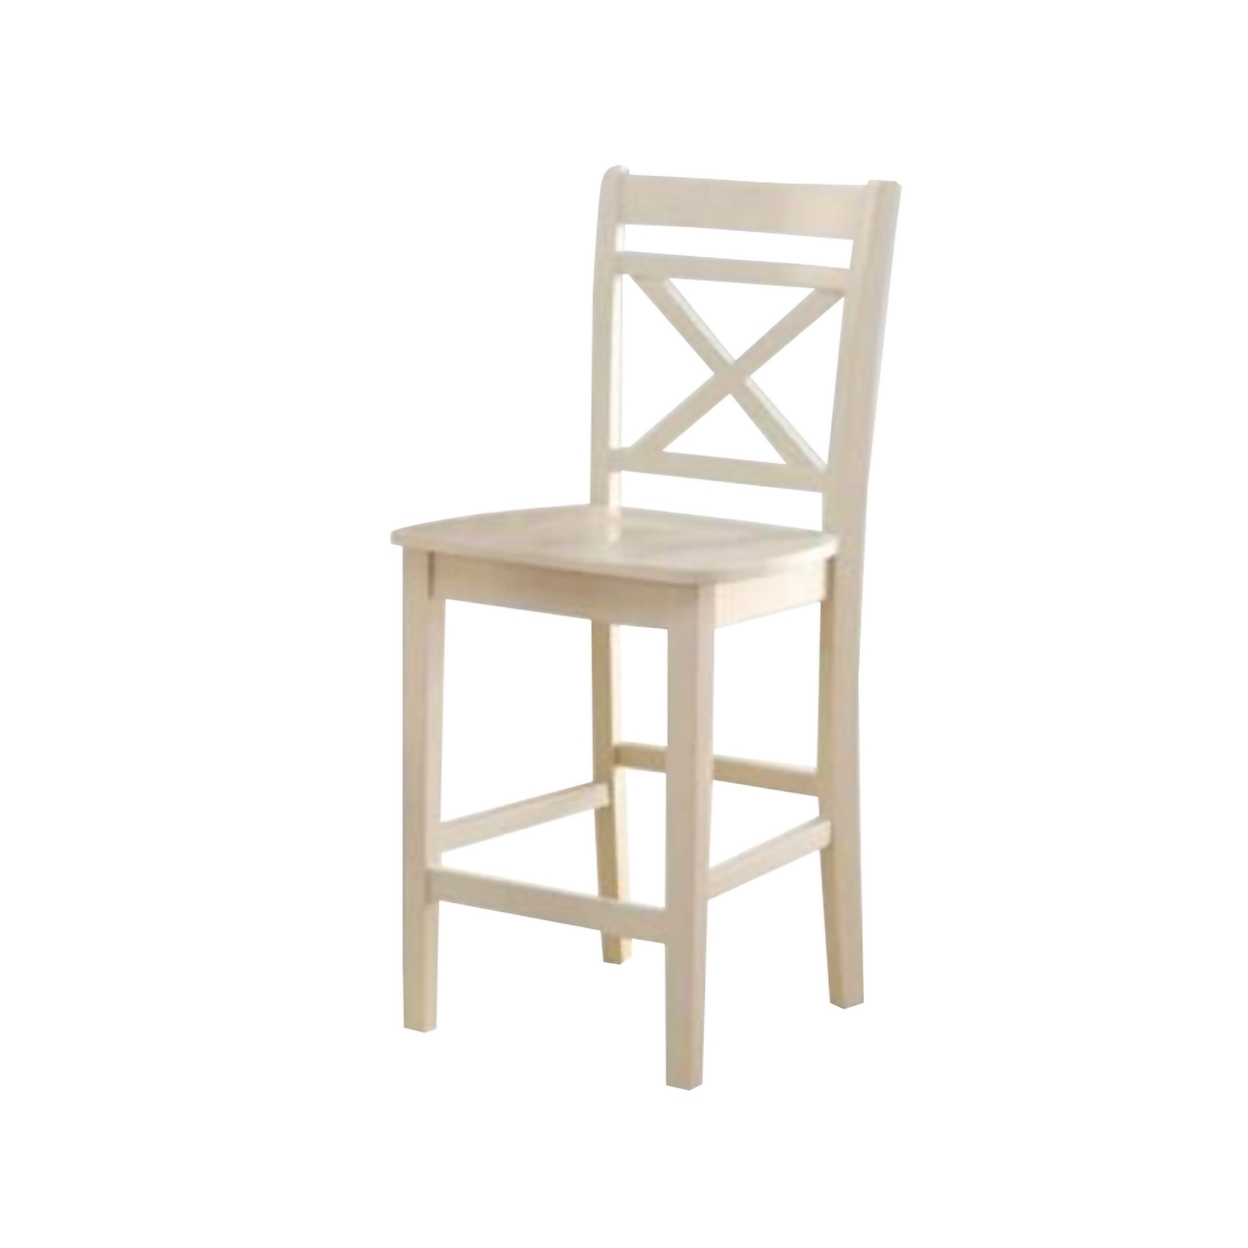 Transitional Style Wooden Counter Height Chair With Cross Back, Set Of 2, Cream- Saltoro Sherpi